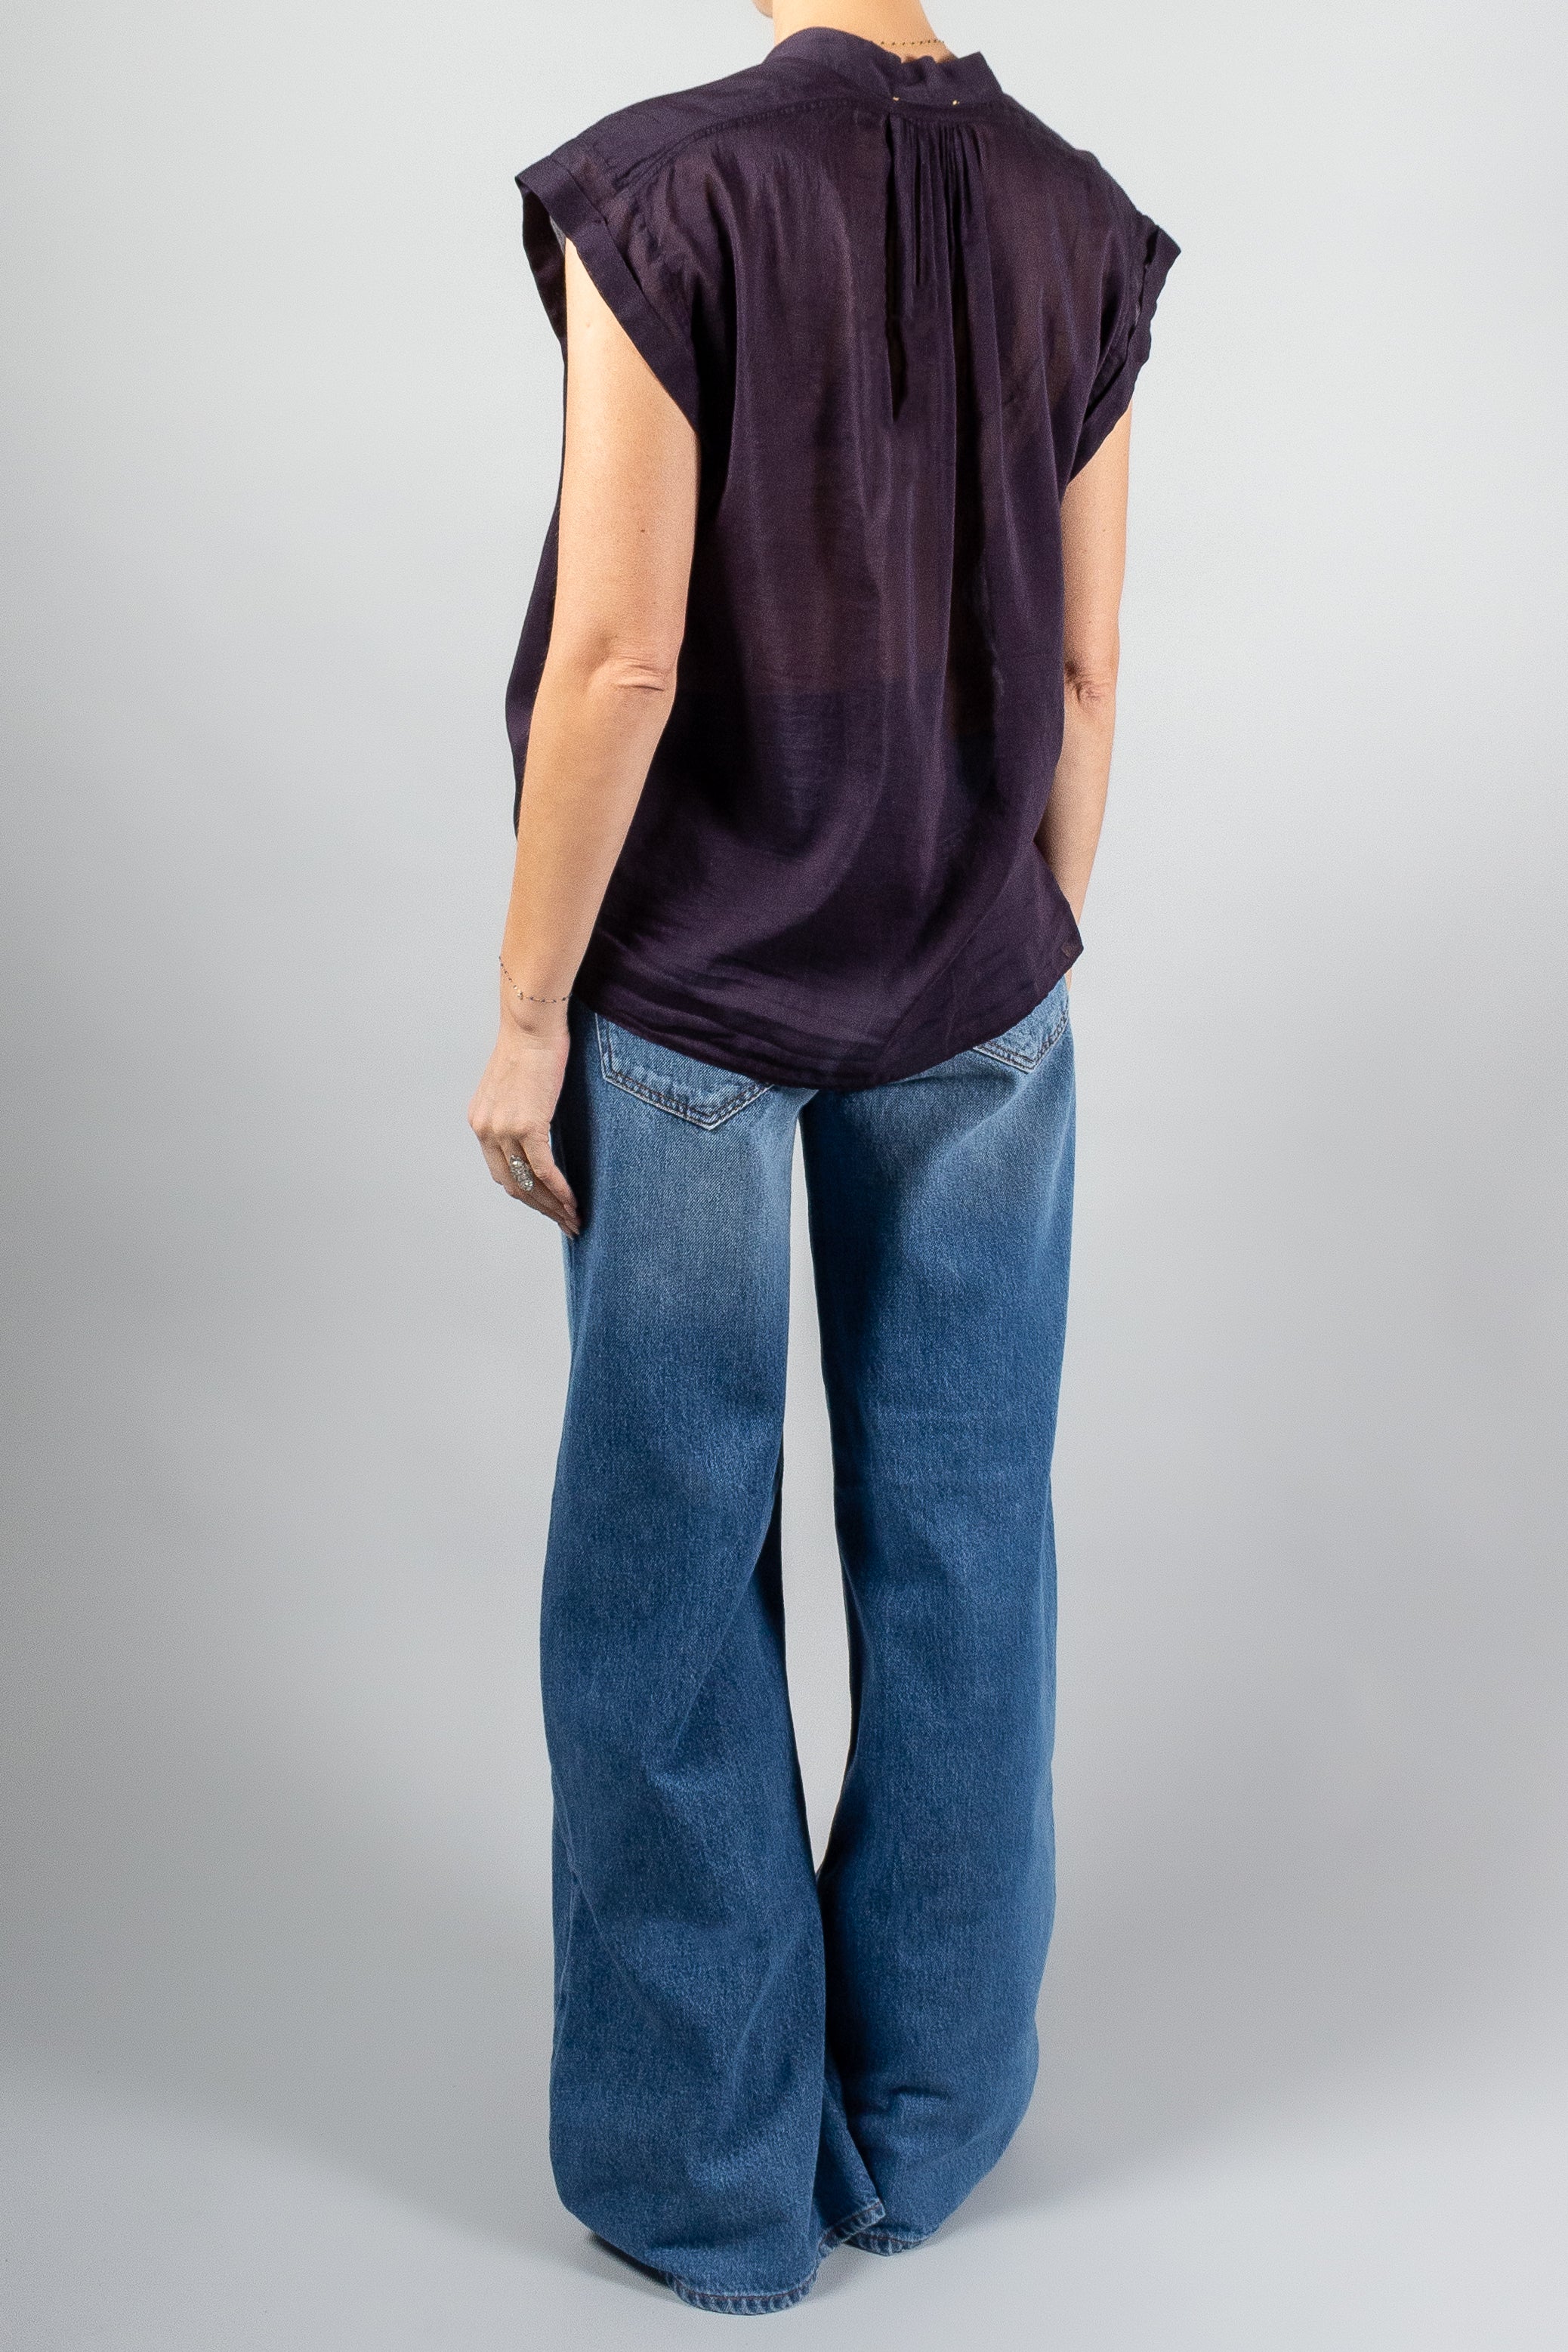 Forte Forte Cotton Silk Voile Short Sleeved Top-Tops-Misch-Boutique-Vancouver-Canada-misch.ca